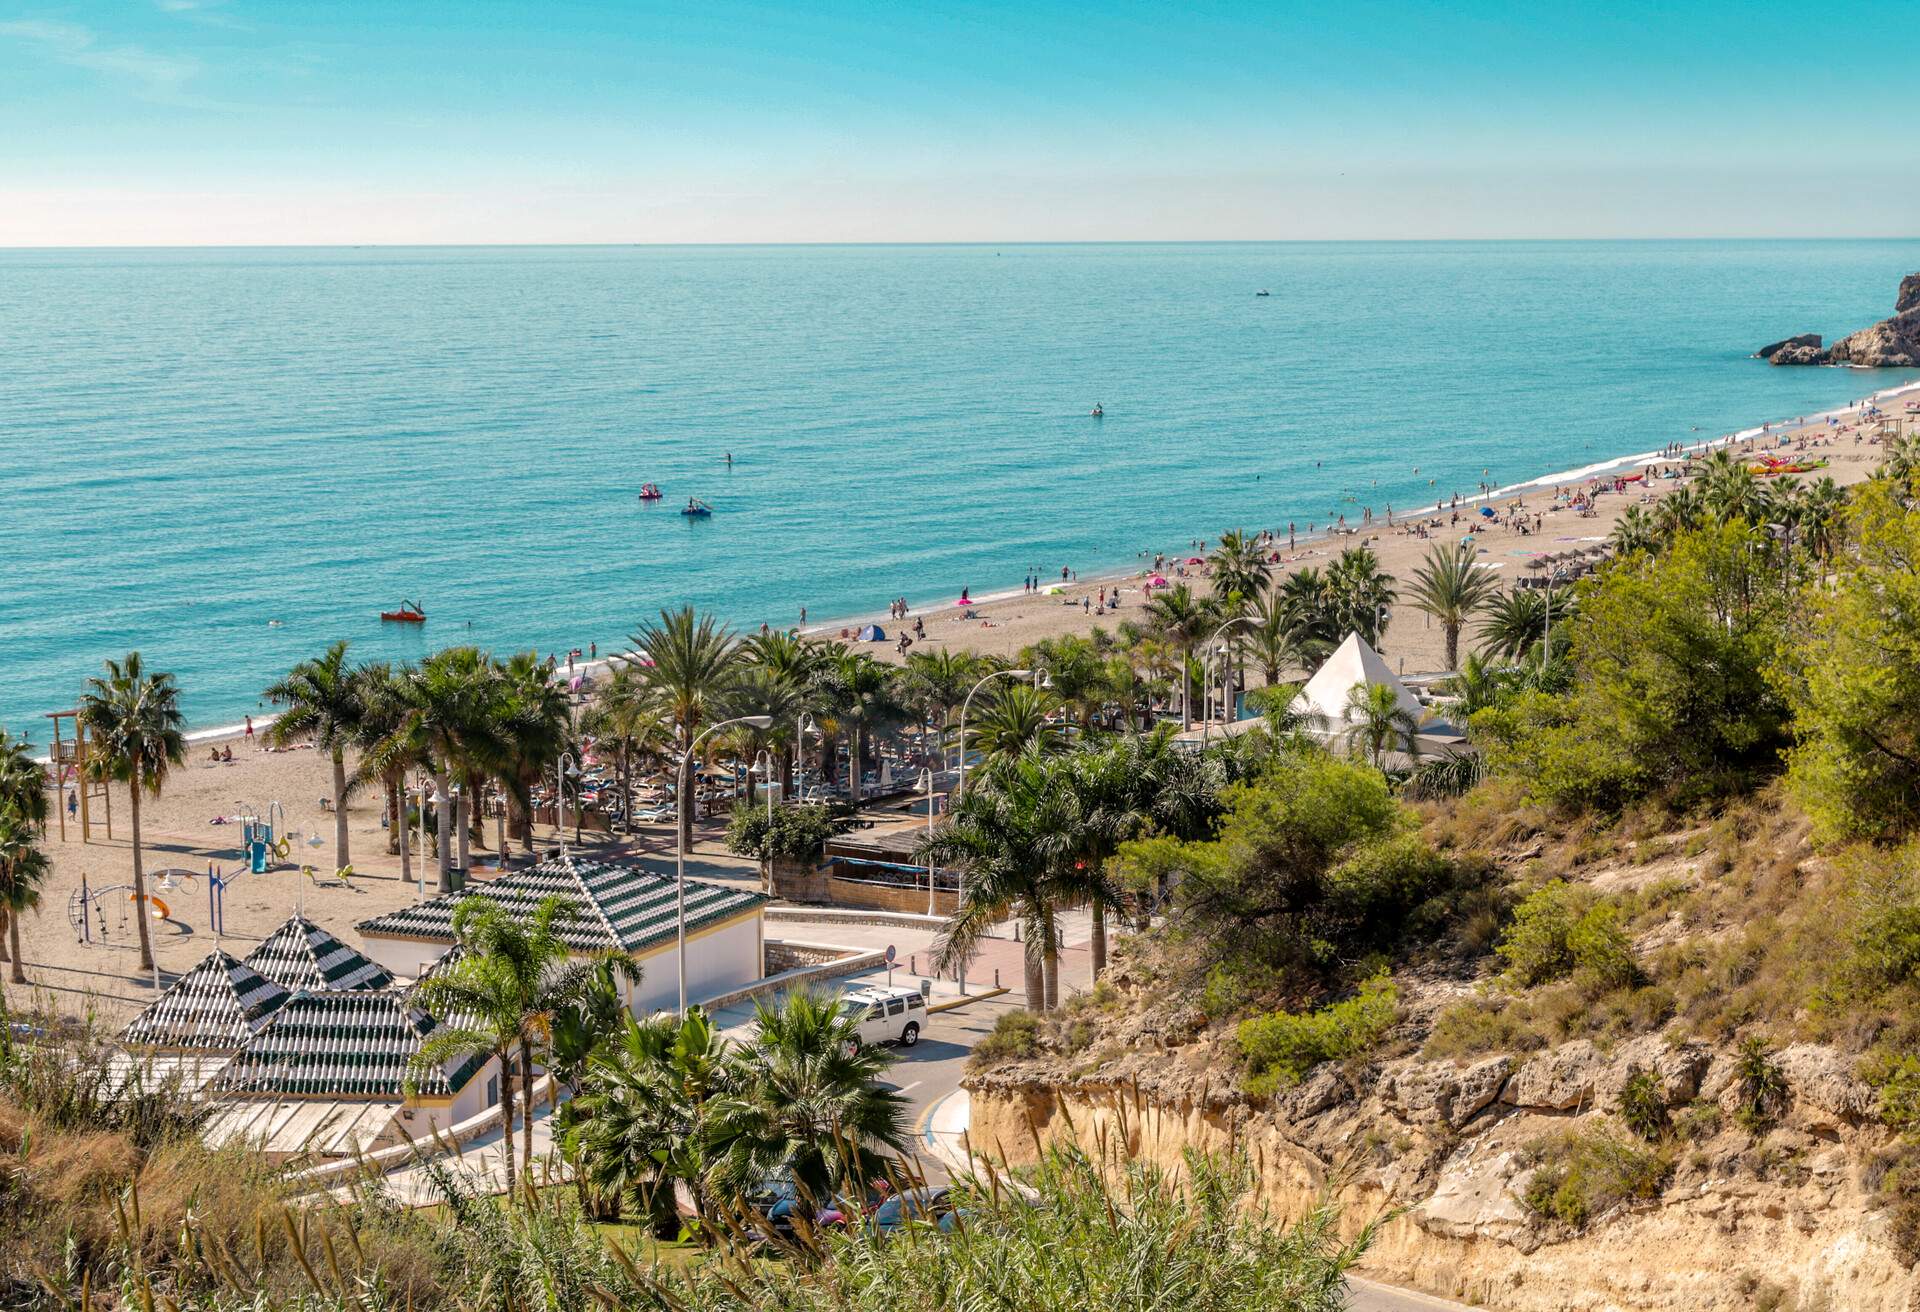 Playa Burriana at Nerja, Costa del Sol, Malaga. Very popular beach with tourists from all over. The beach has multiple restaurants and bars as well as souvenir shopping.